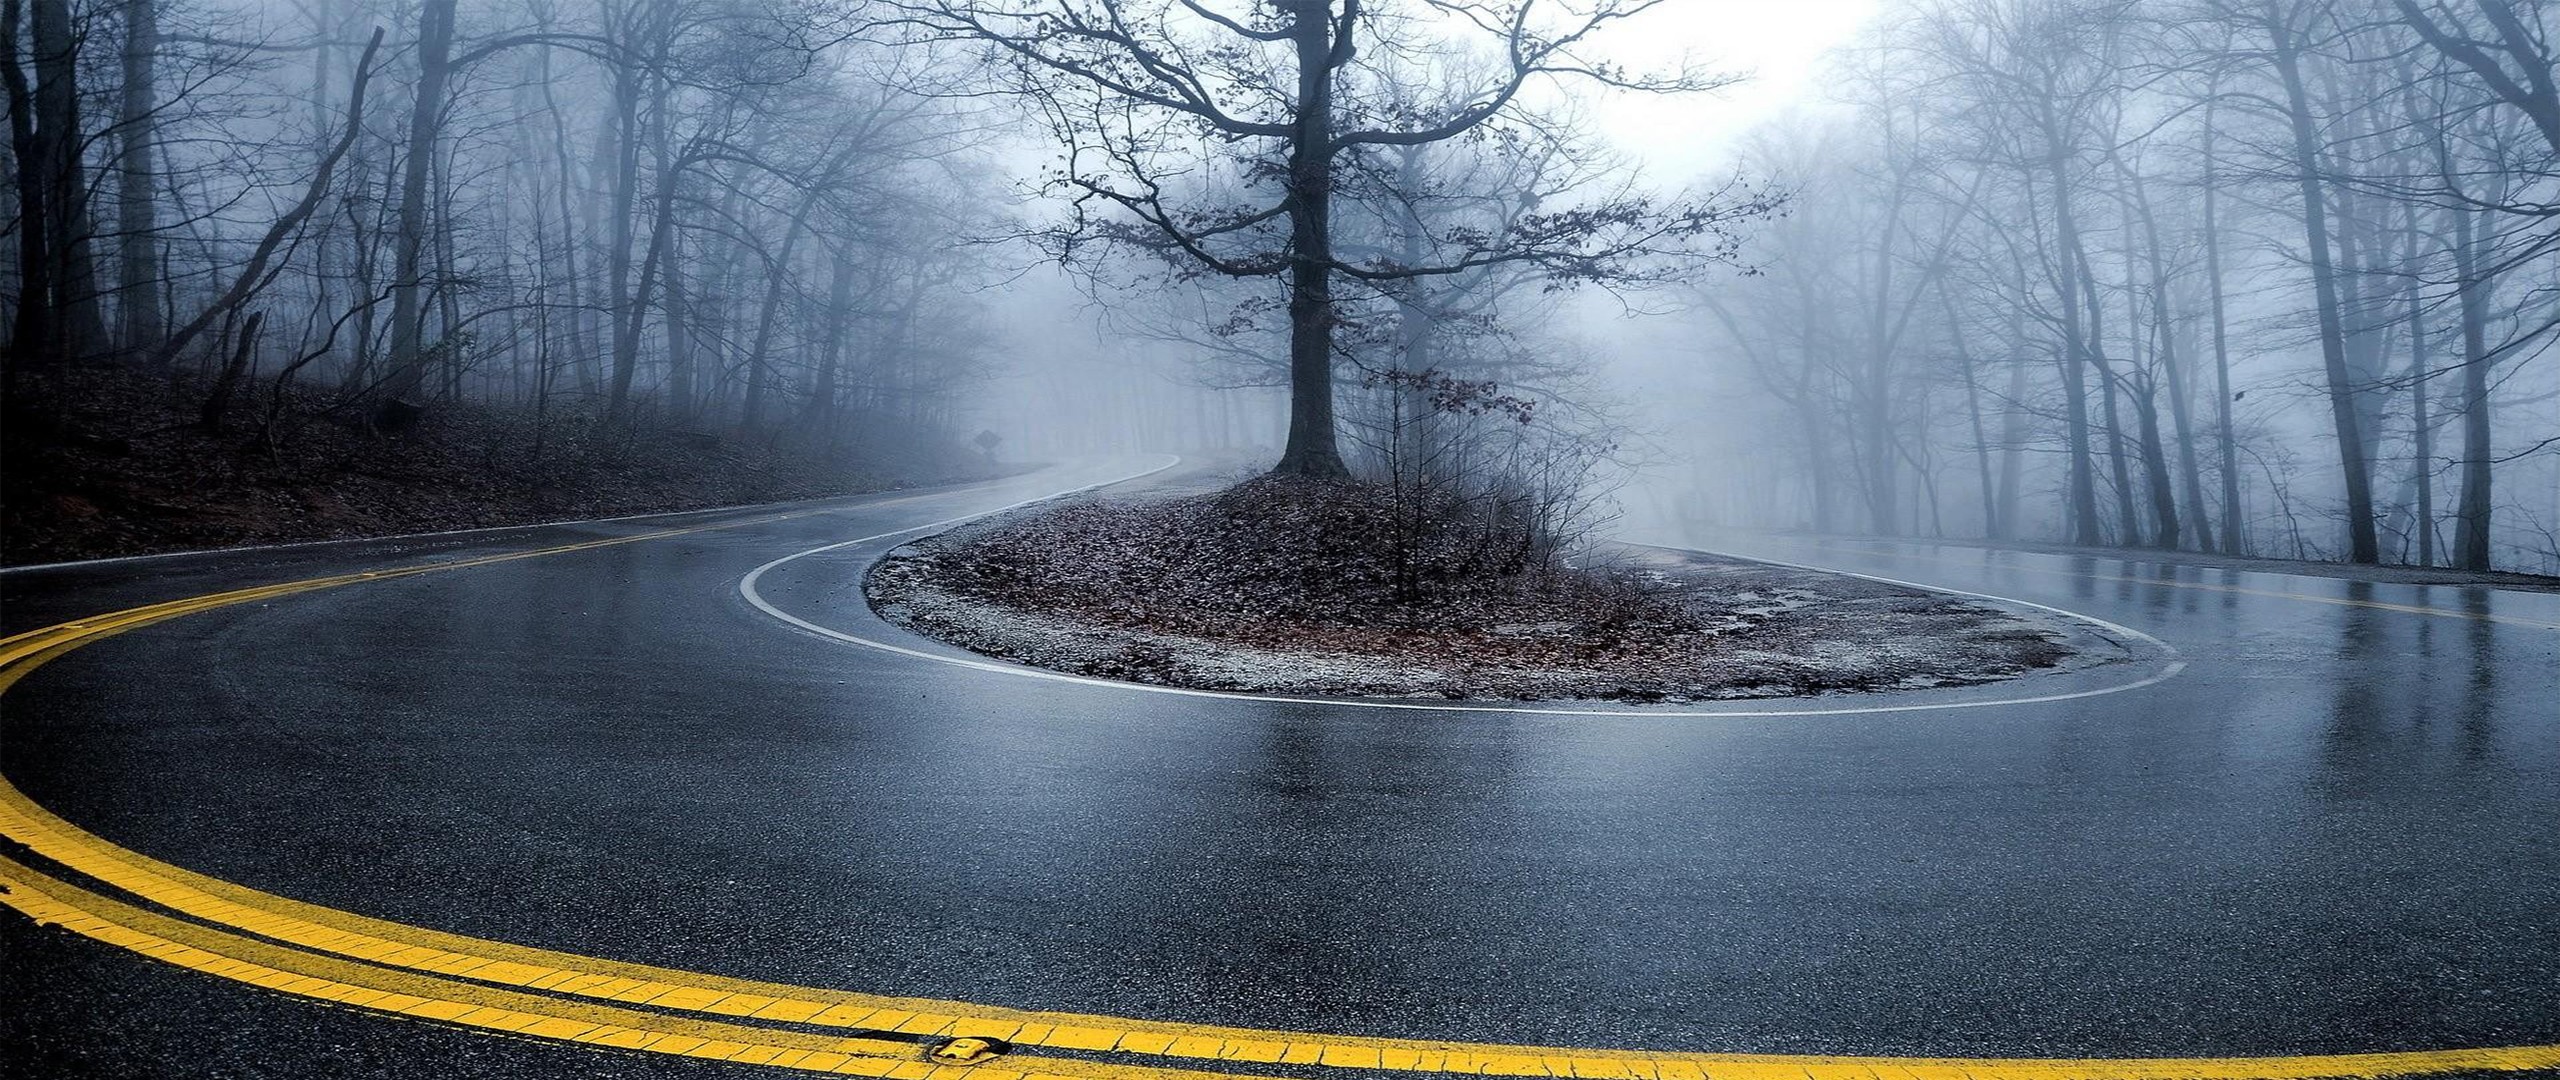 General 2560x1080 ultrawide photography road hairpin turns outdoors asphalt trees mist